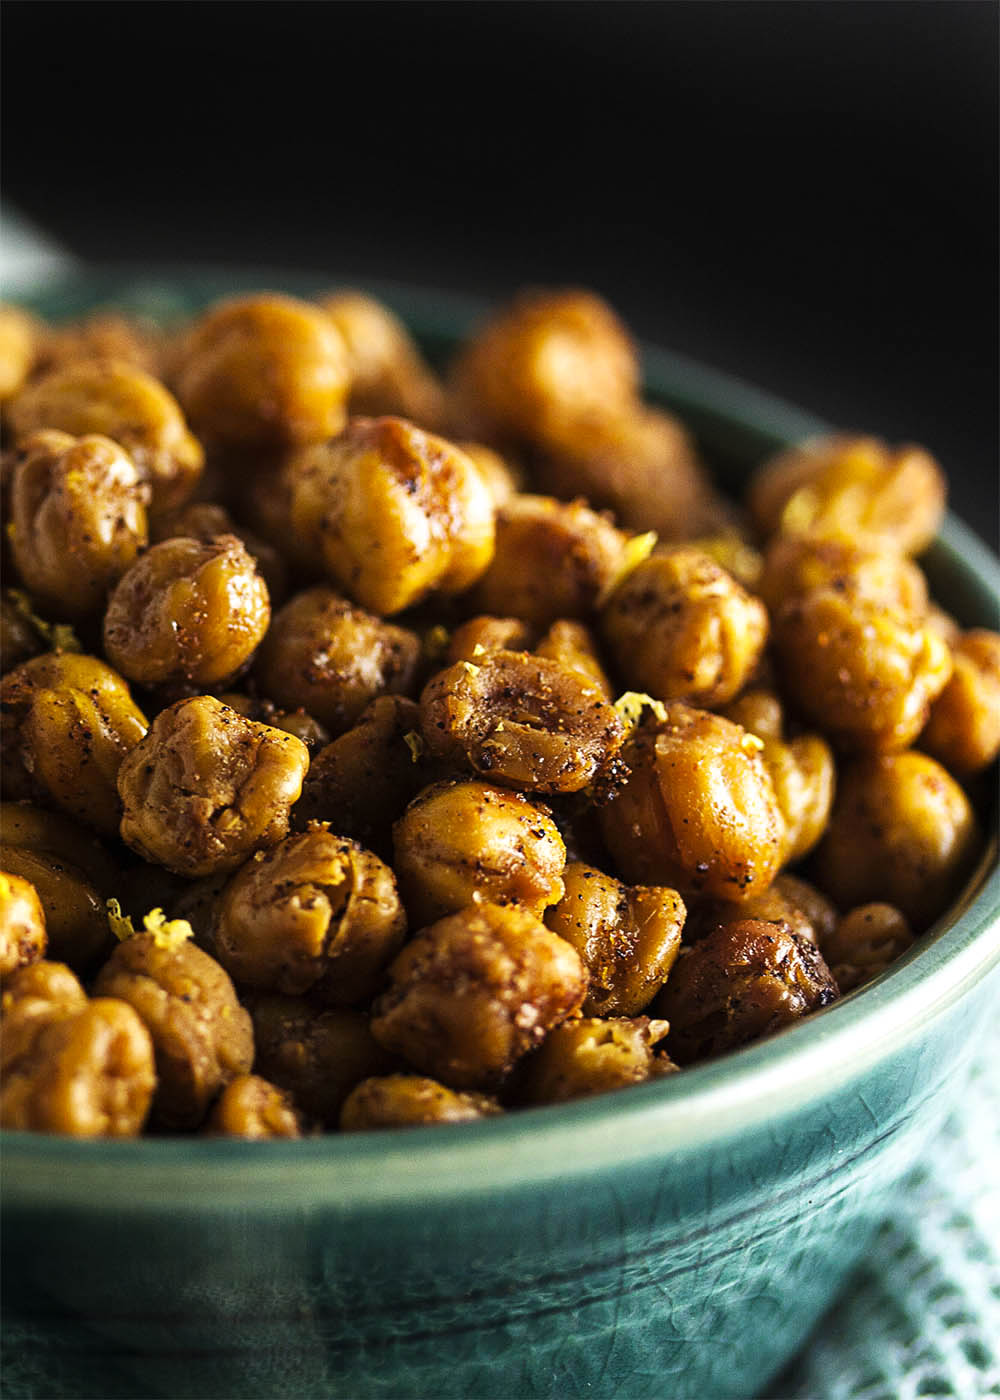 Spiced Dry Roasted Chickpeas - Dry roasting chickpeas produces an incredibly crunchy, tasty, and easy snack. And it's even healthy too! Just be careful - they're addictive. | justalittlebitofbacon.com